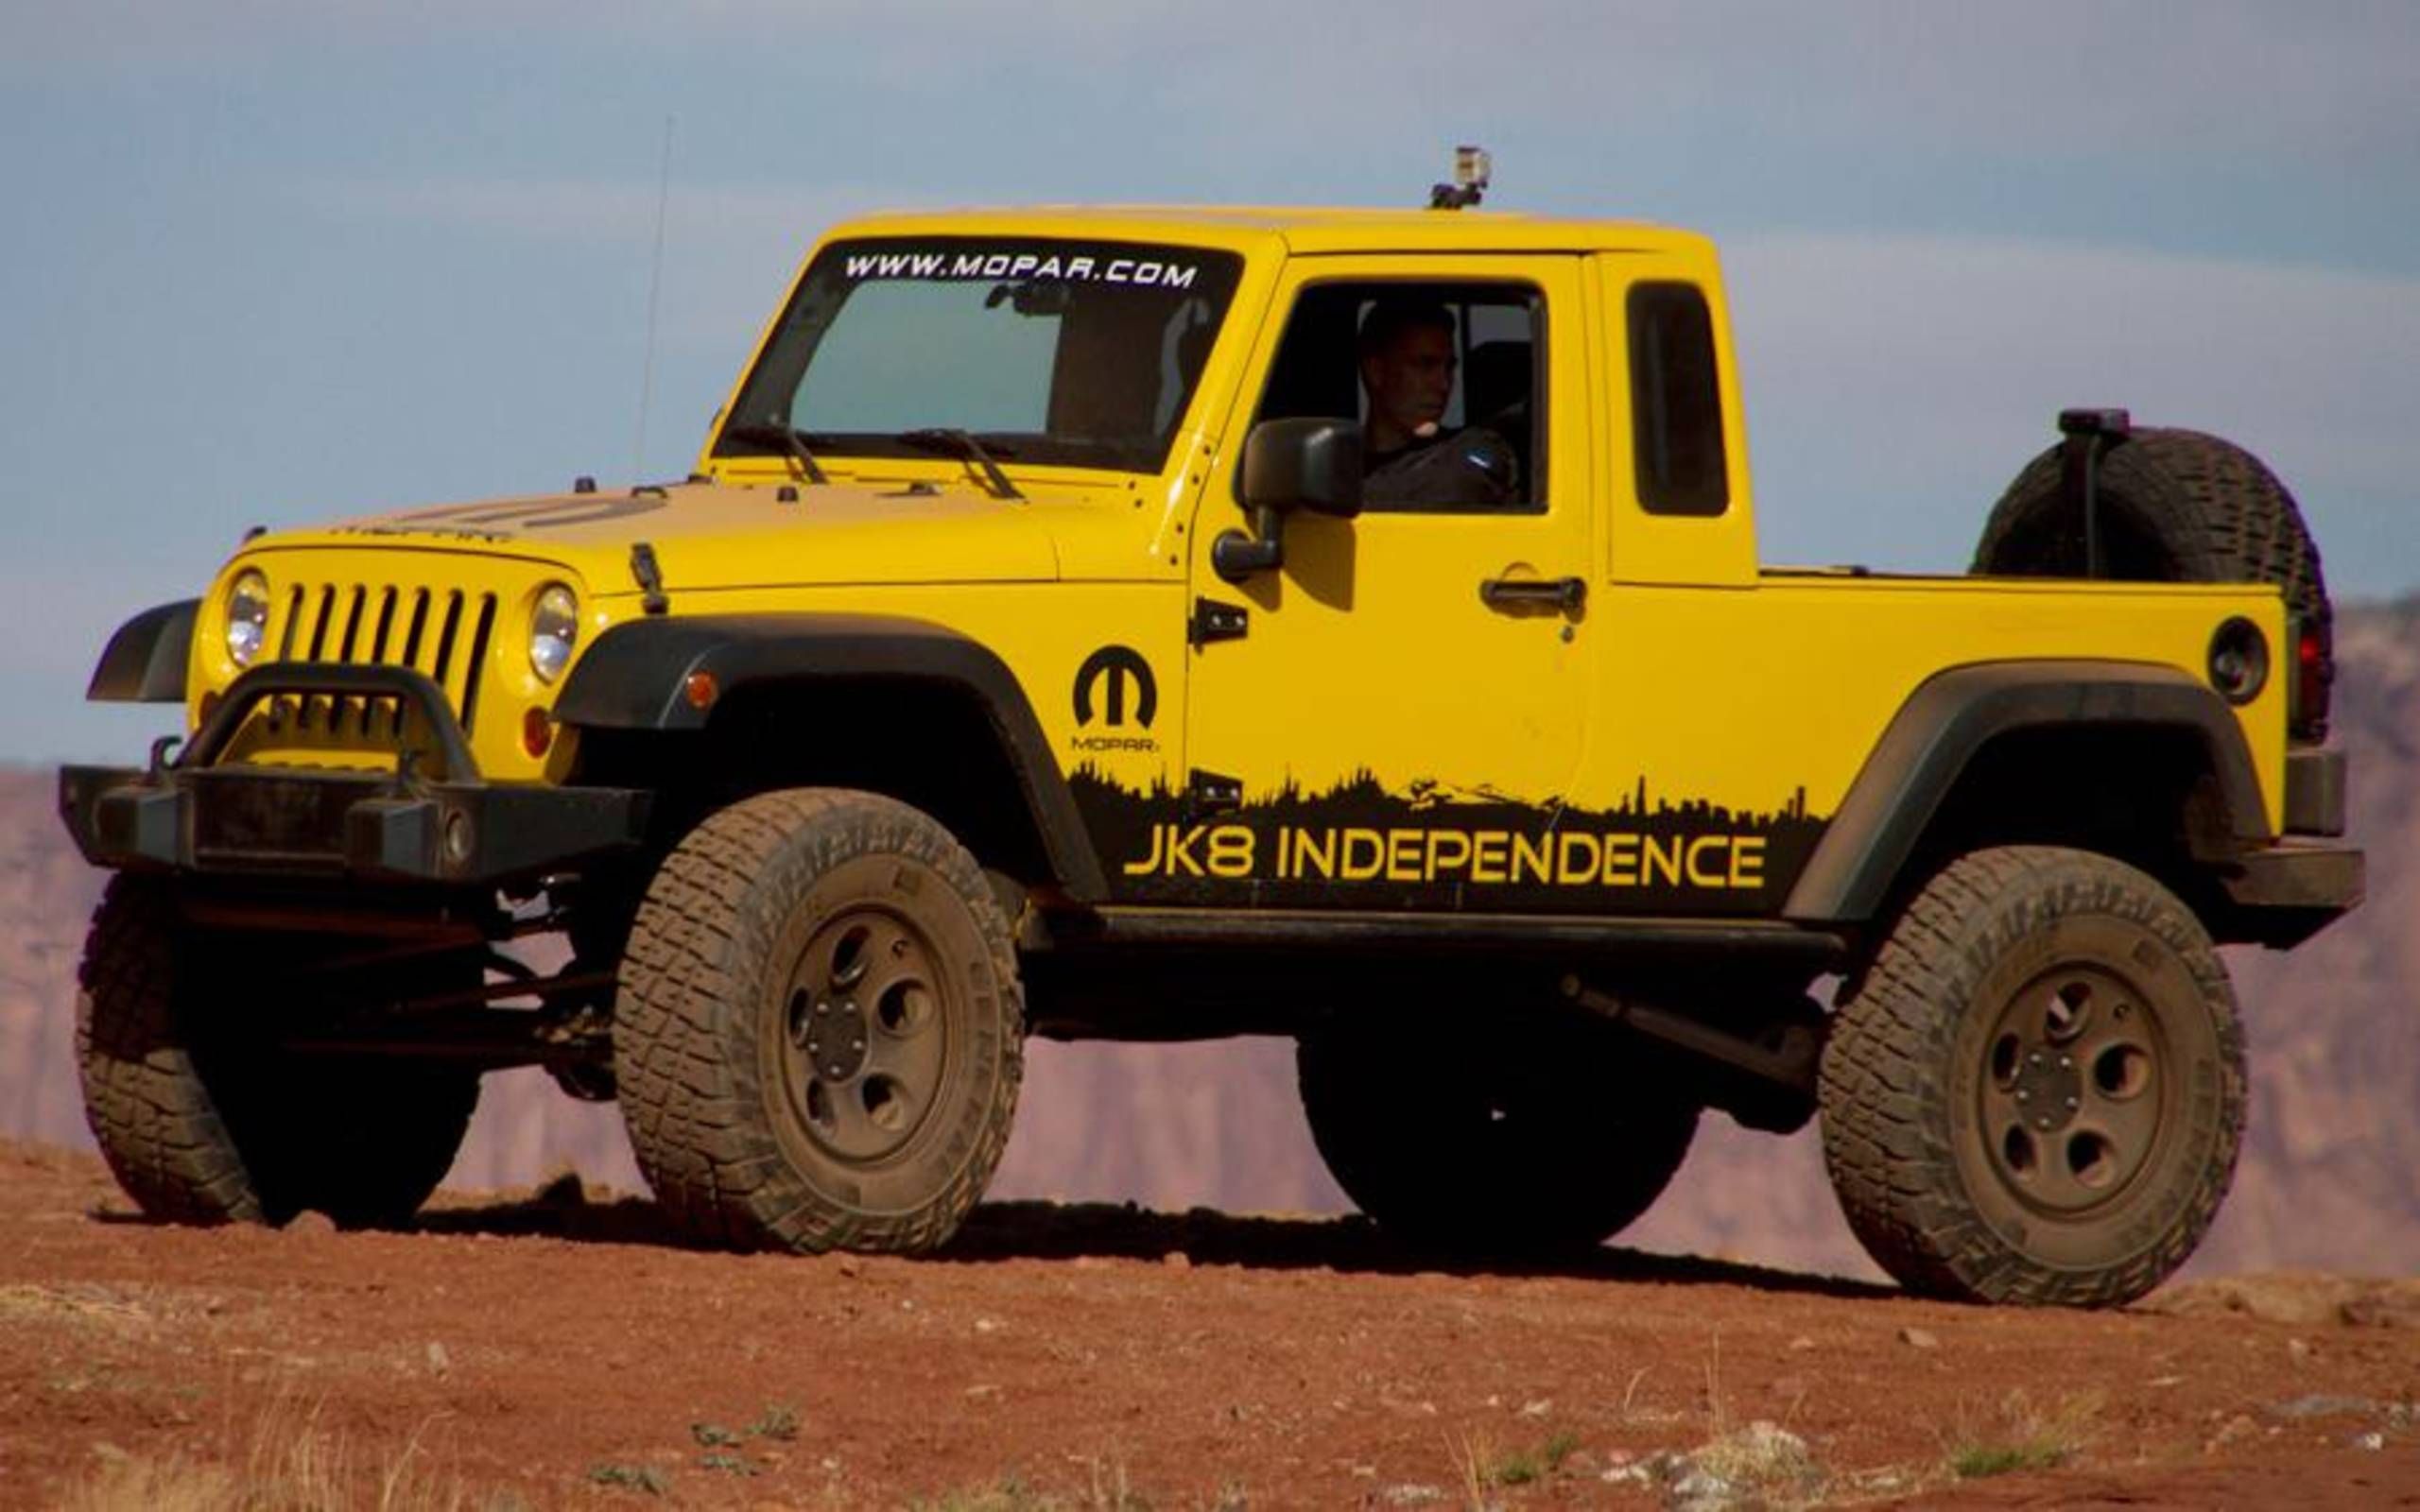 Jeep pickup at least 4 years away, CEO says